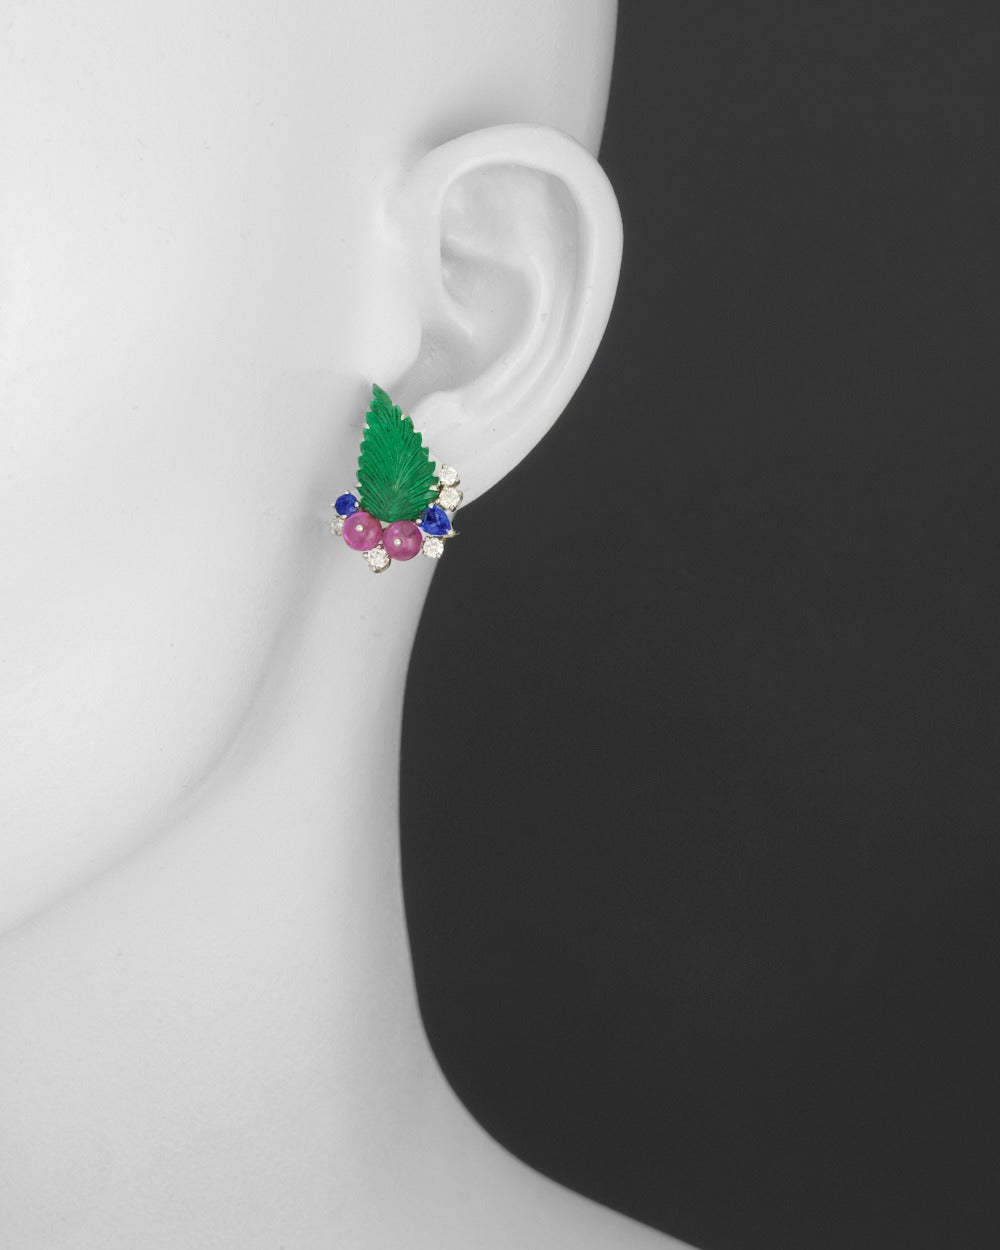 Gemstone leaf earrings, showcasing two emeralds carved in the shape of leaves weighing 7.13 total carats, accented by four ruby beads weighing 3.86 total carats, two pear-shaped sapphires weighing 0.47 total carats, two round-cut sapphires weighing